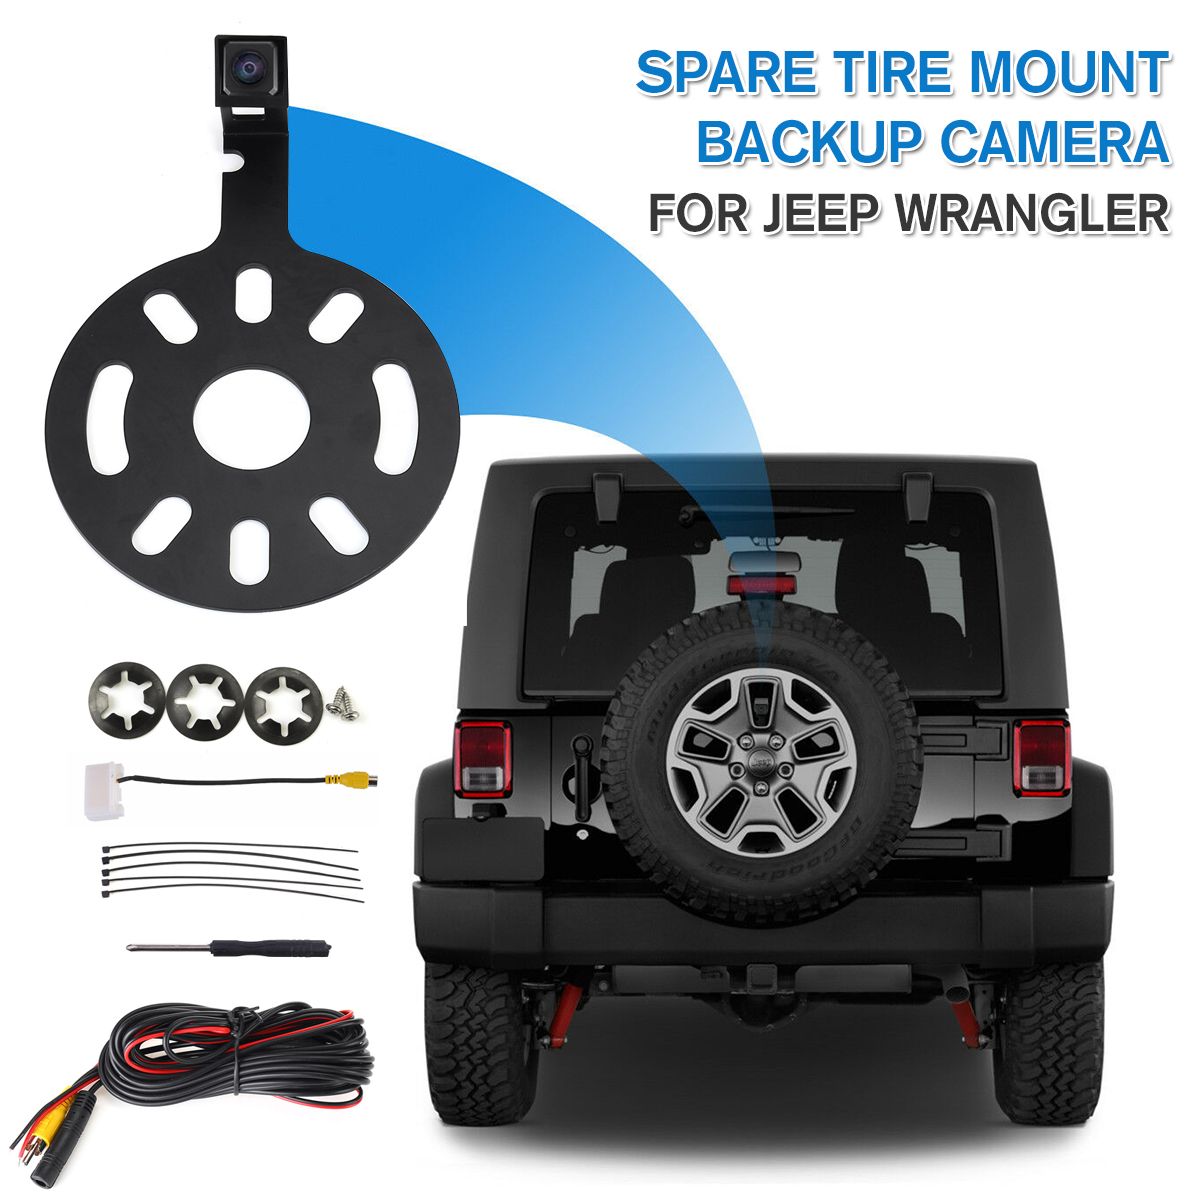 IP67-Car-Reverse-Backup-Camera-Night-Vision-Spare-Tire-Mount-For-Jeep-1684370